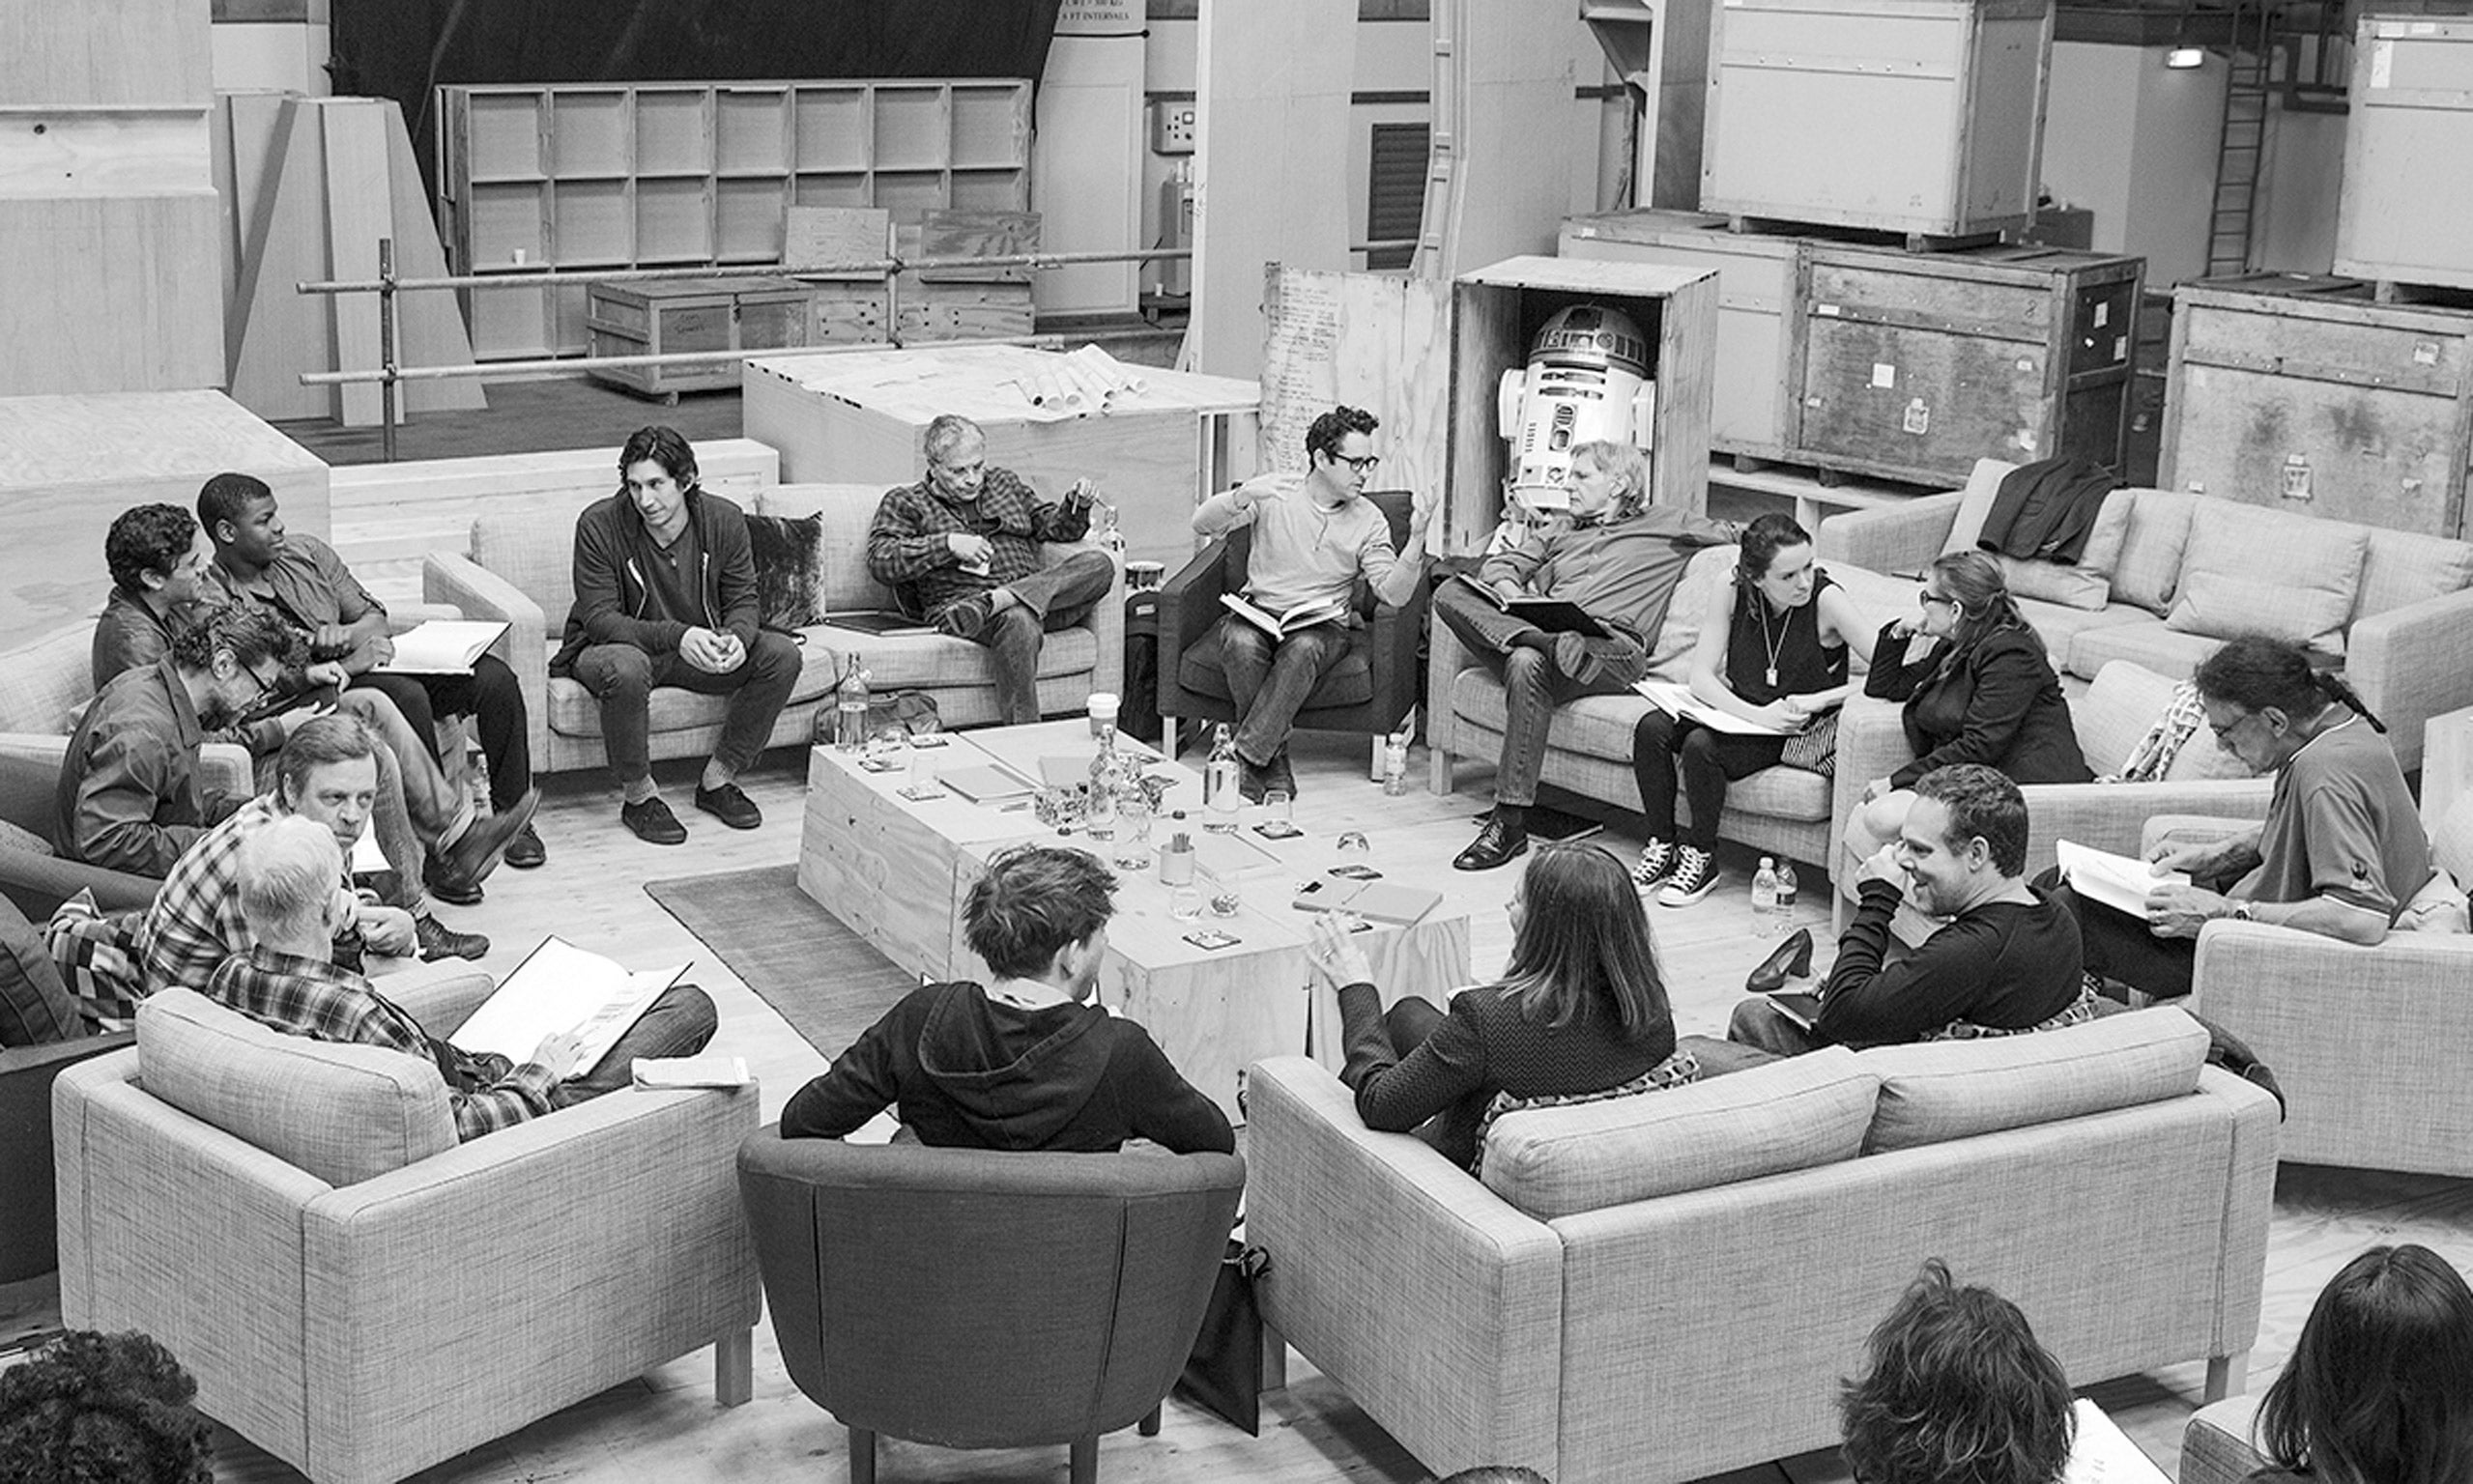 The Episode VII cast during a read-through at Pinewood Studios. (clockwise from top center right) Writer/Director/Producer J.J Abrams, Harrison Ford, Daisy Ridley, Carrie Fisher, Peter Mayhew, Producer Bryan Burk, Lucasfilm President and Producer Kathleen